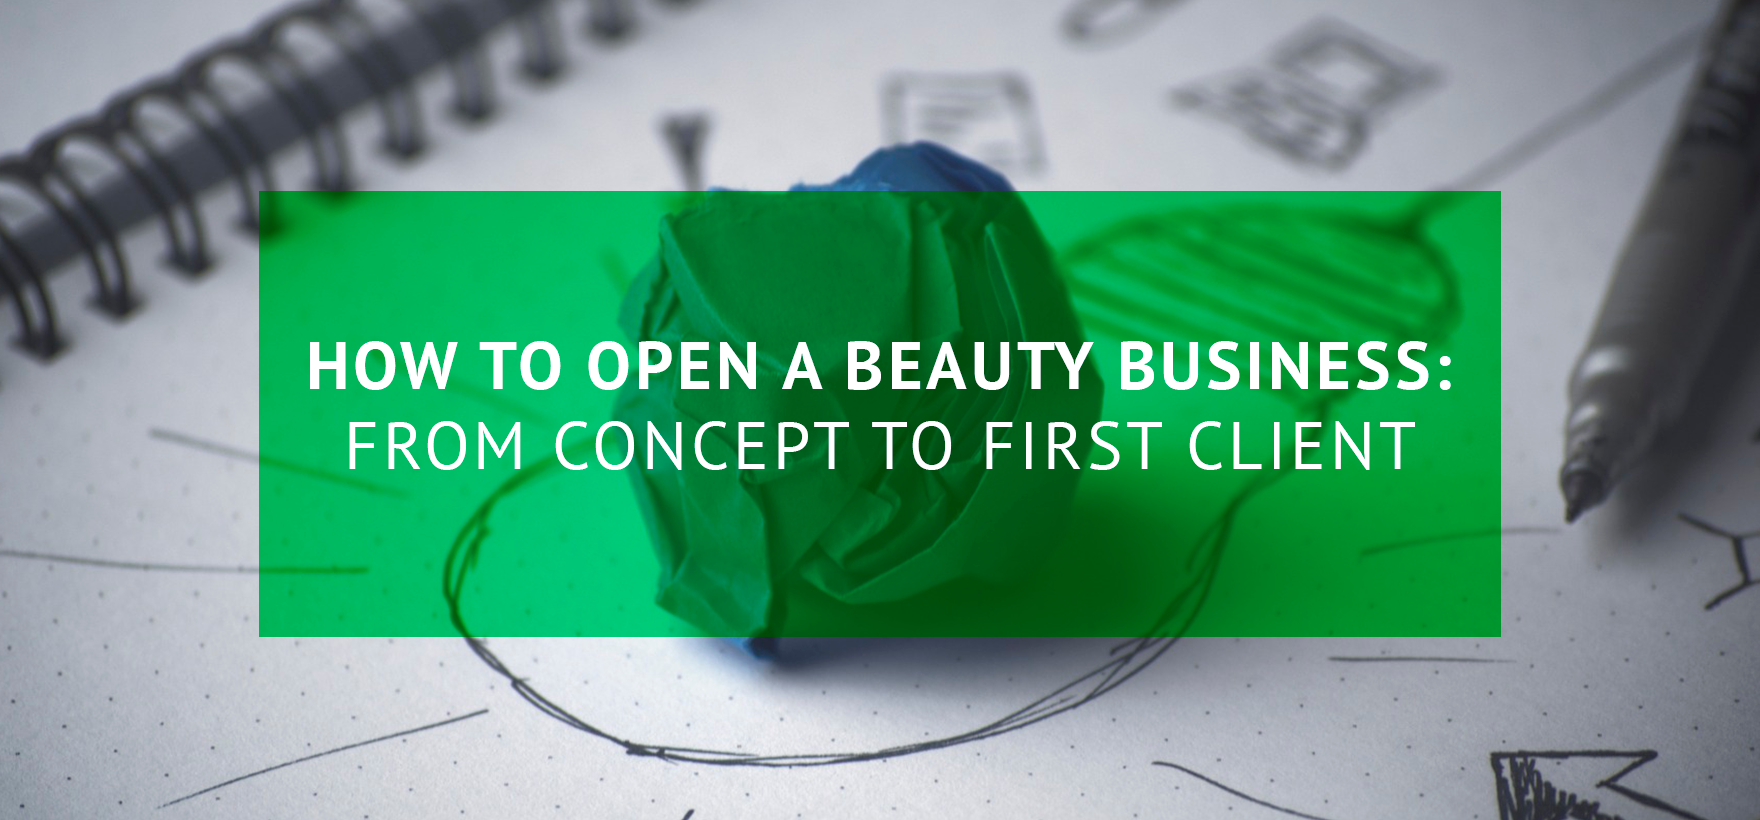 How to open a beauty business